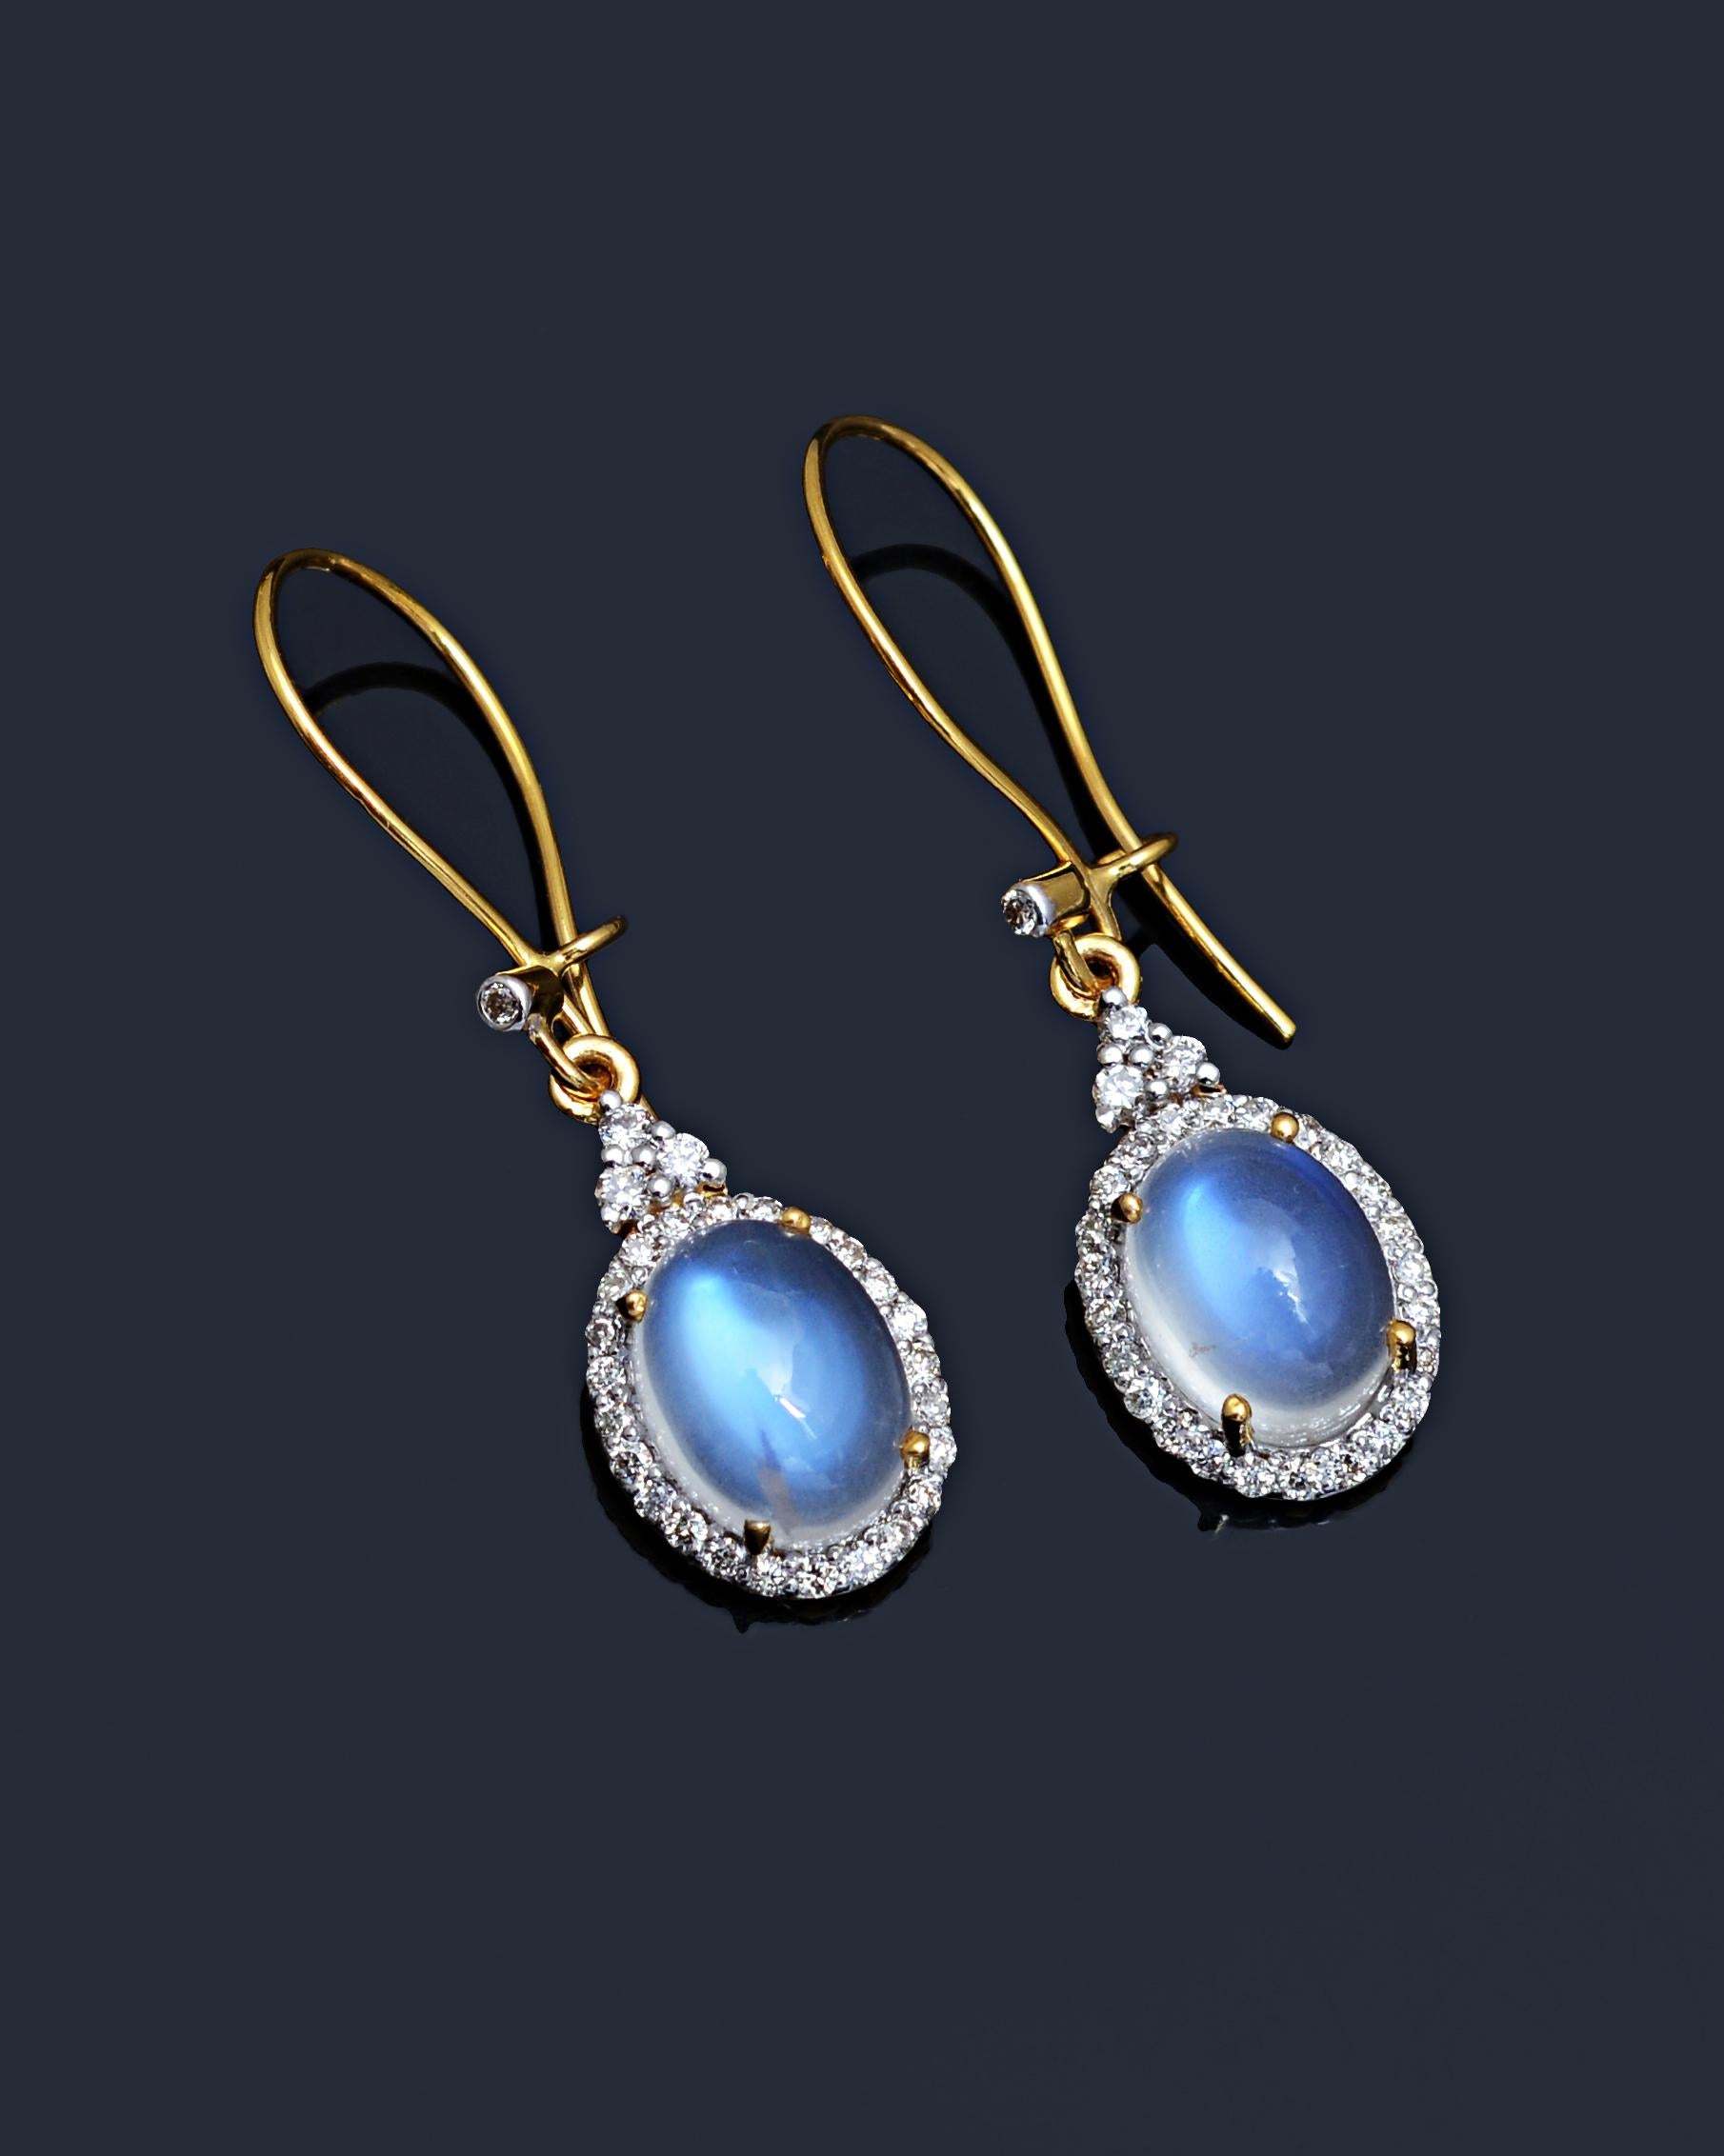 Brilliant Cut Moonstone Dangle Earrings with Diamond in 14k Gold For Sale